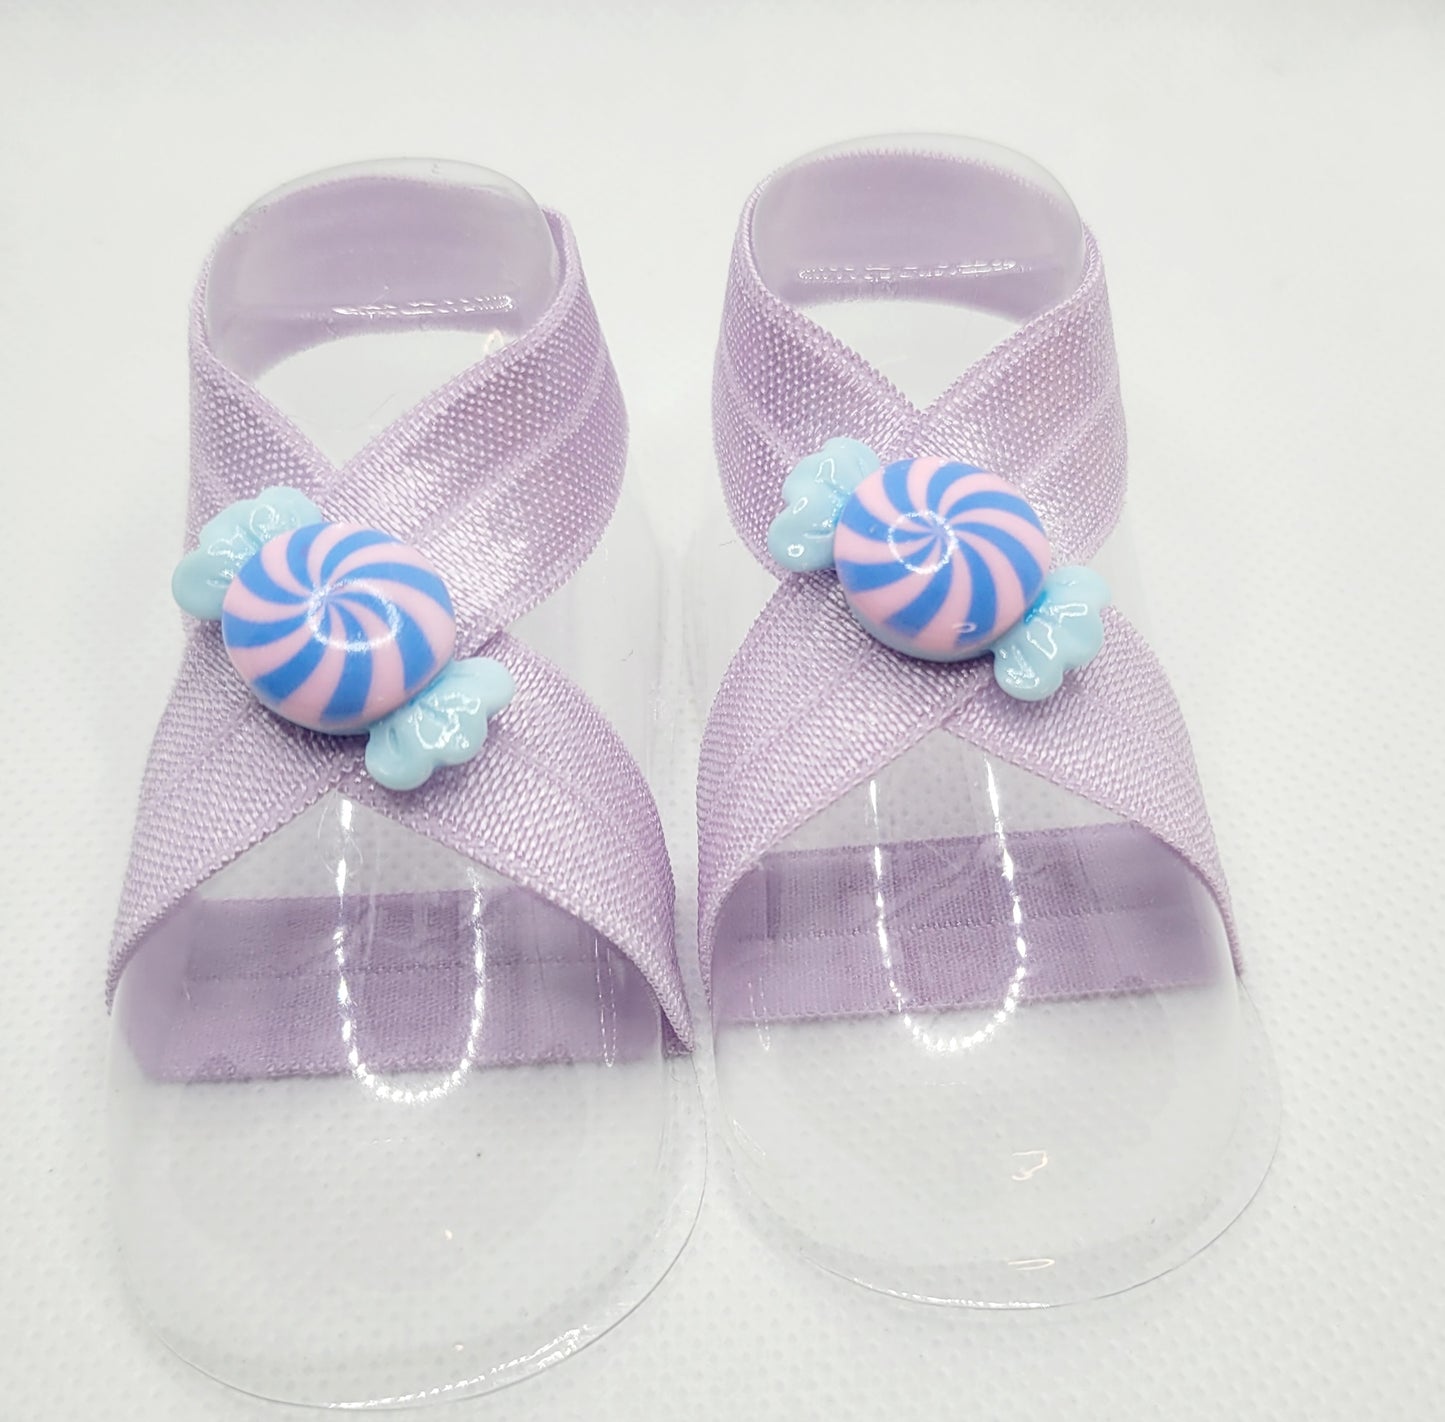 Lavender Holiday Candy Treat Barefoot Sandals for Baby 0-4months old